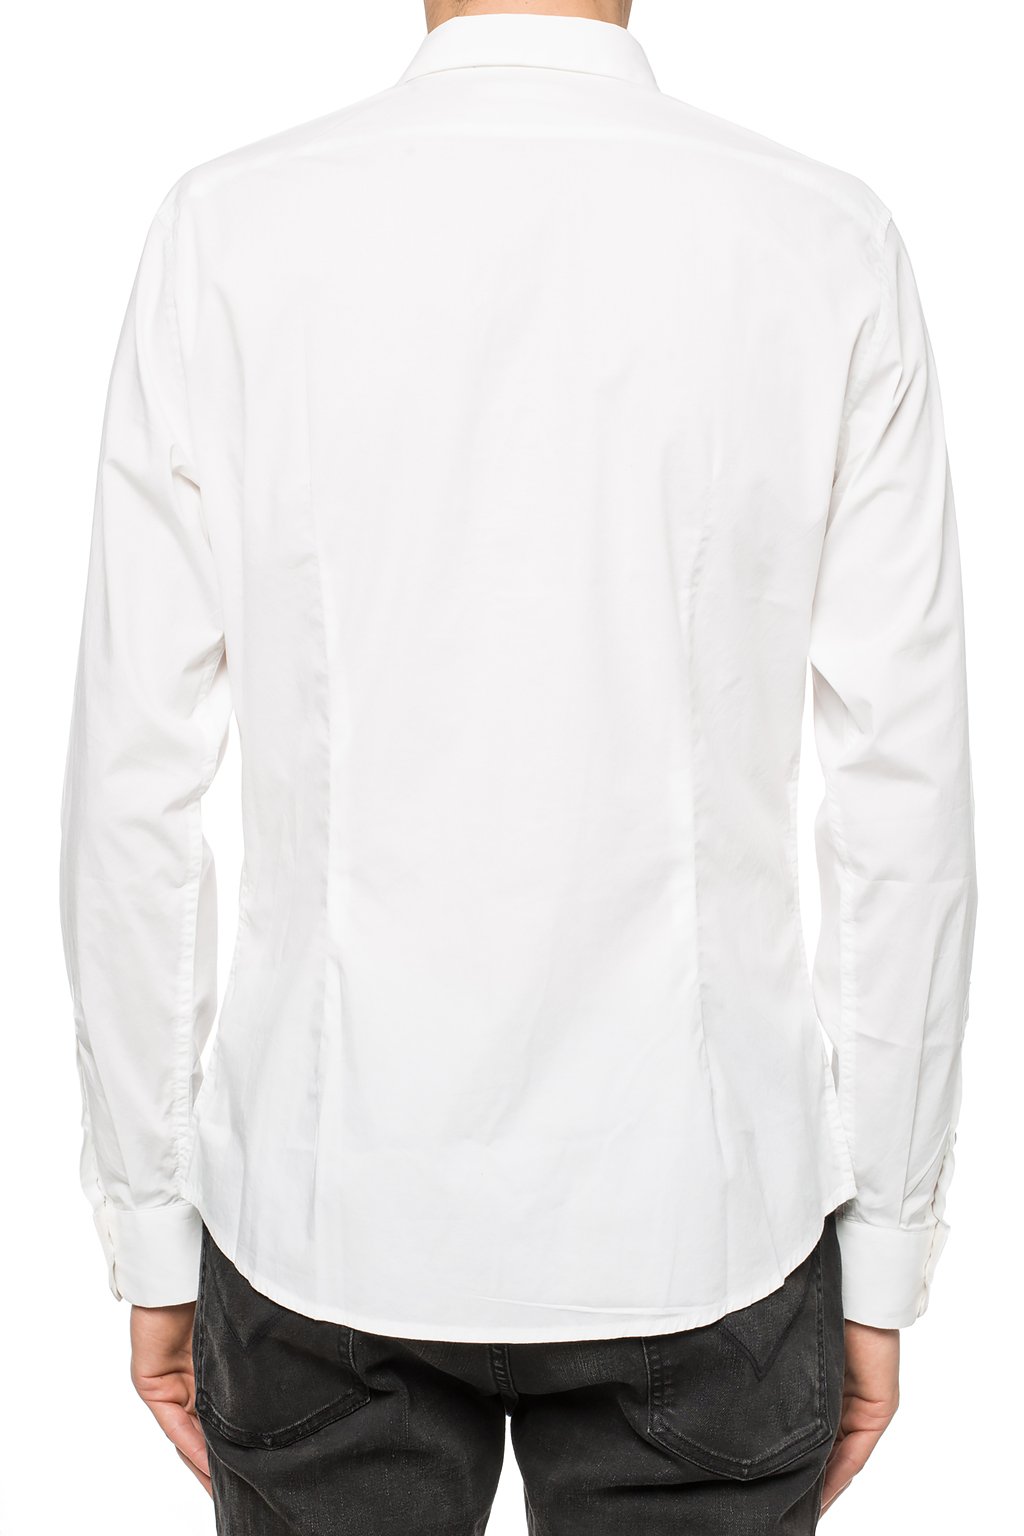 Diesel ‘S-NAP’ shirt with concealed placket